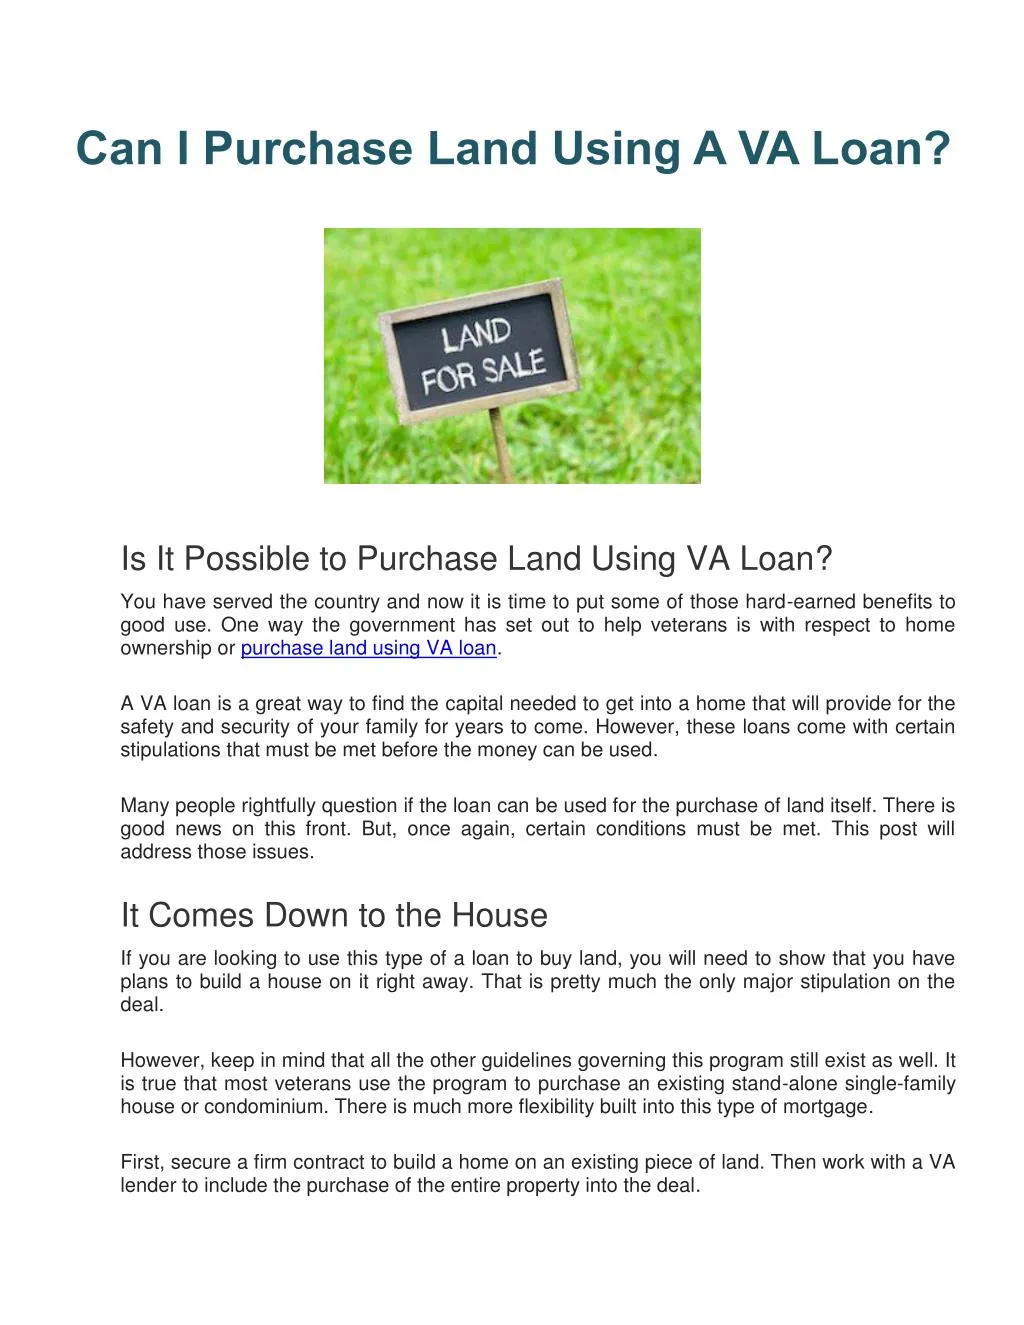 can i purchase land using a va loan